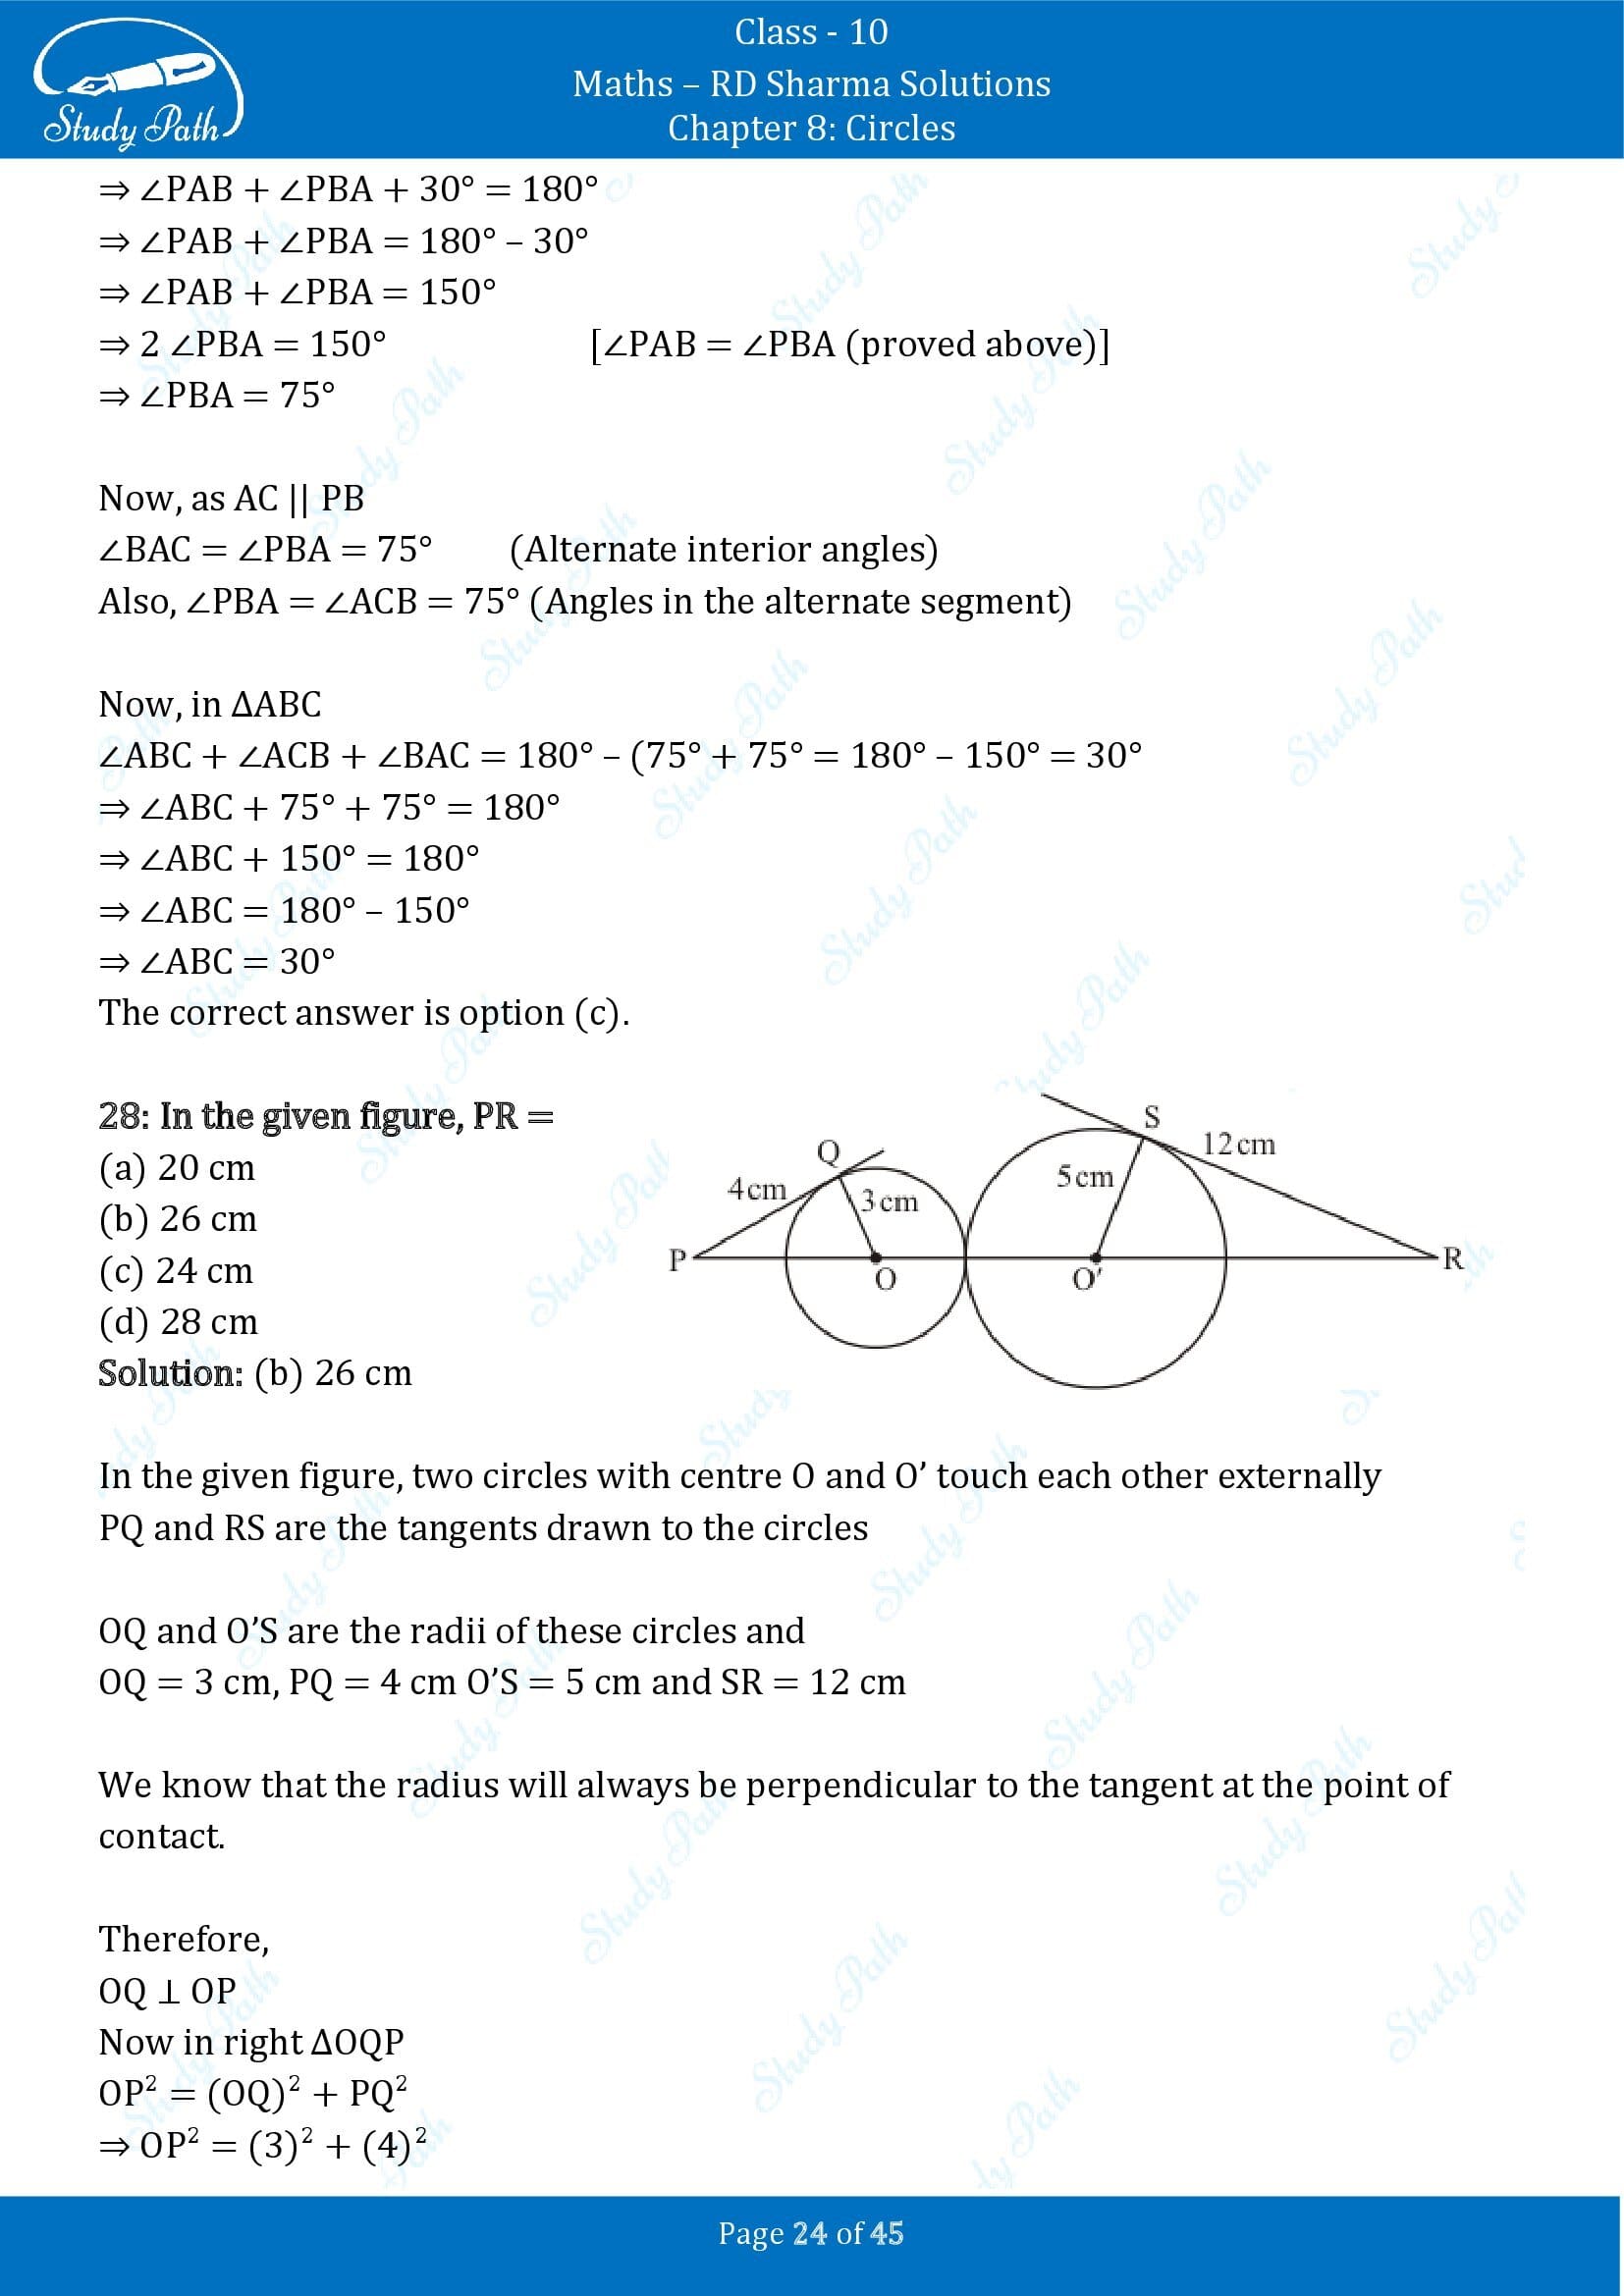 RD Sharma Solutions Class 10 Chapter 8 Circles Multiple Choice Questions MCQs 00024